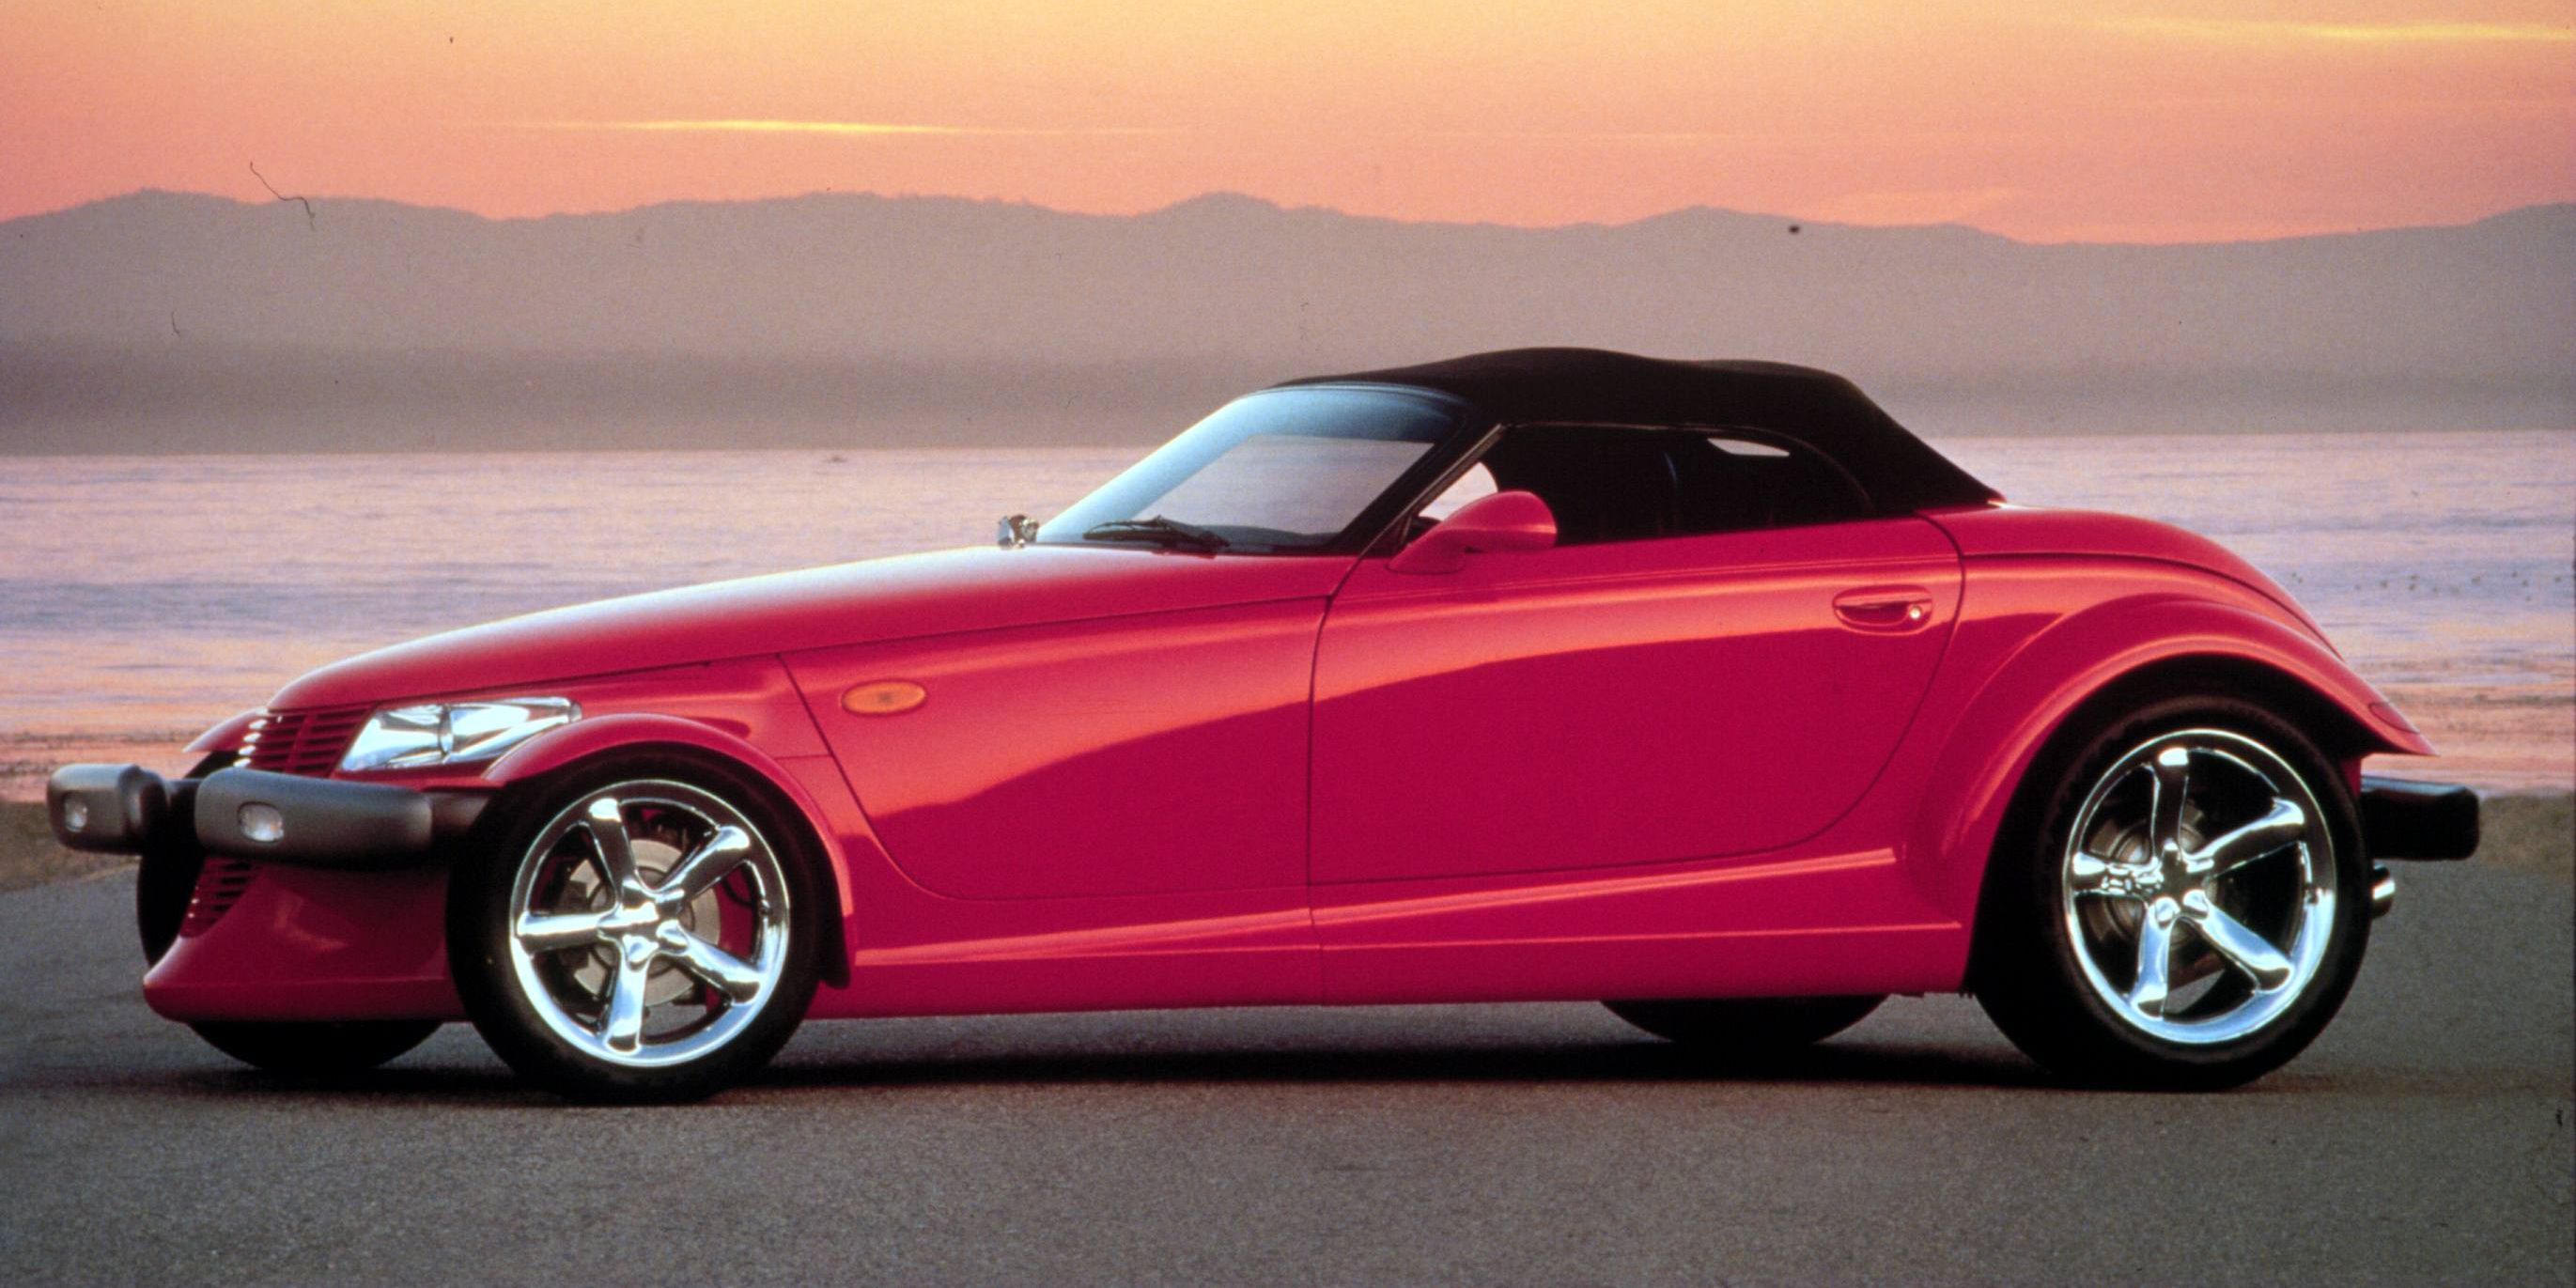 Plymouth Prowler parked outside